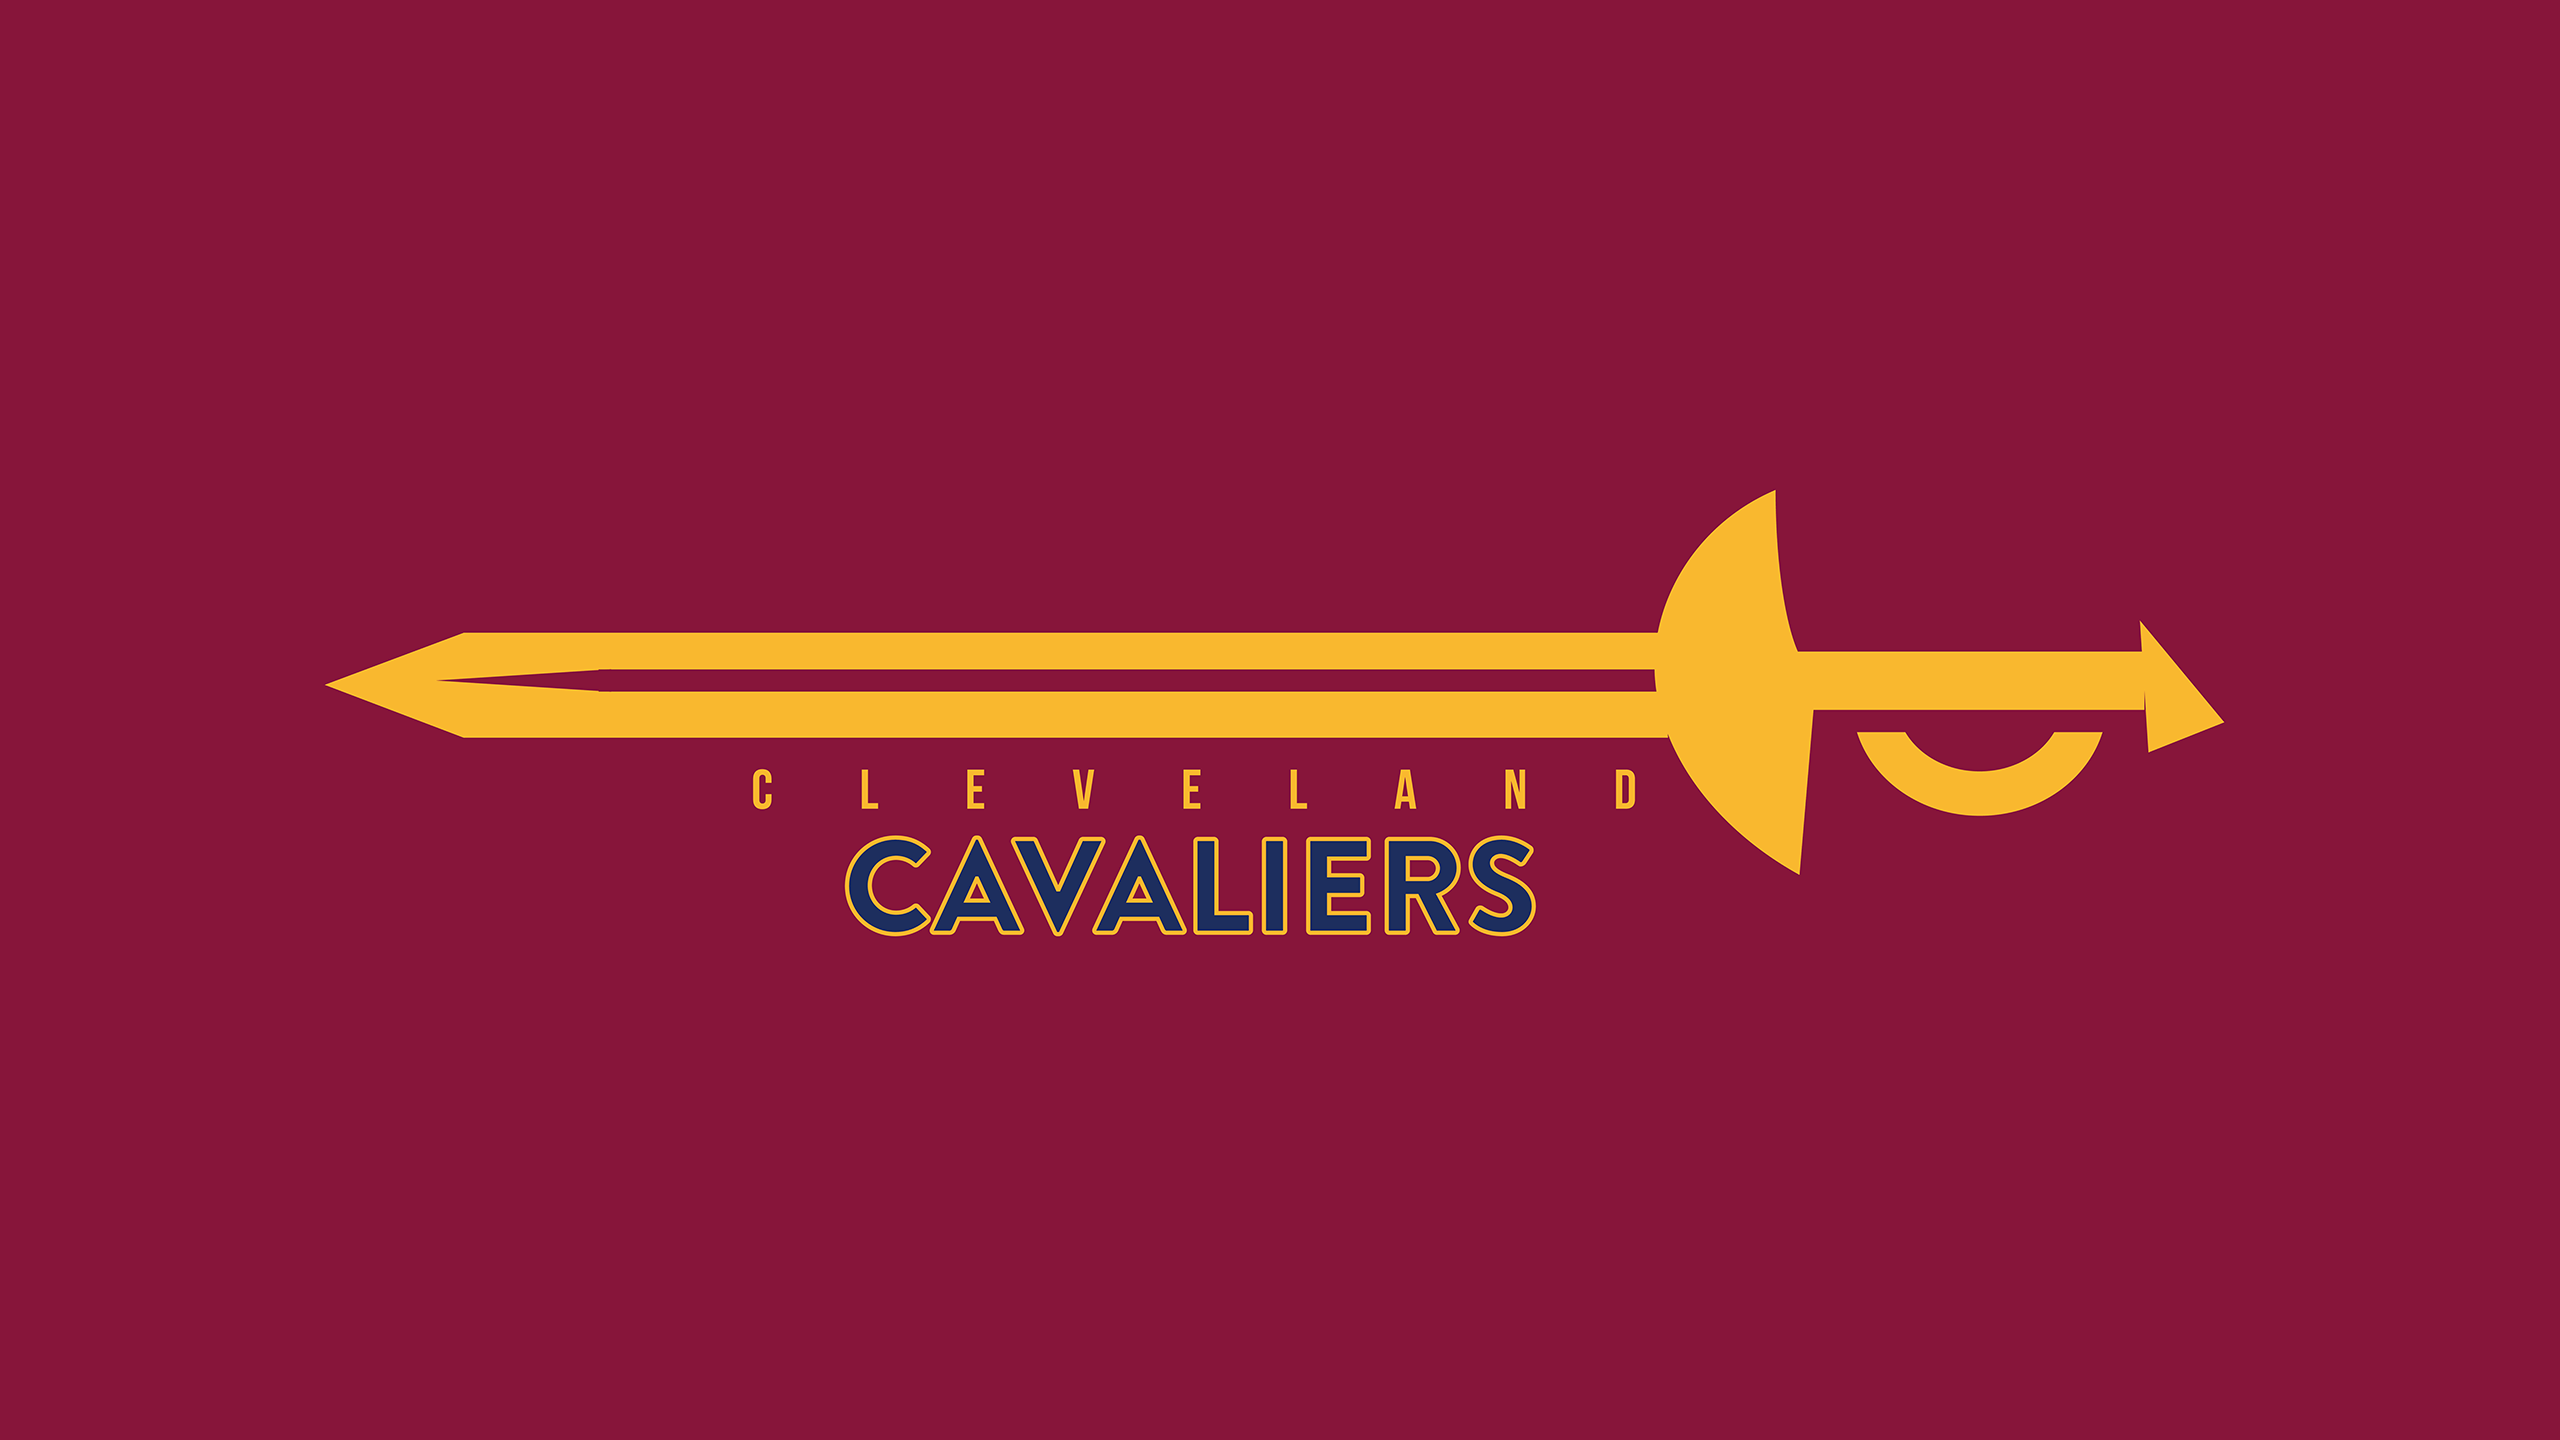 Cleveland Cavaliers Wallpaper High Quality Of Pc HD Pics